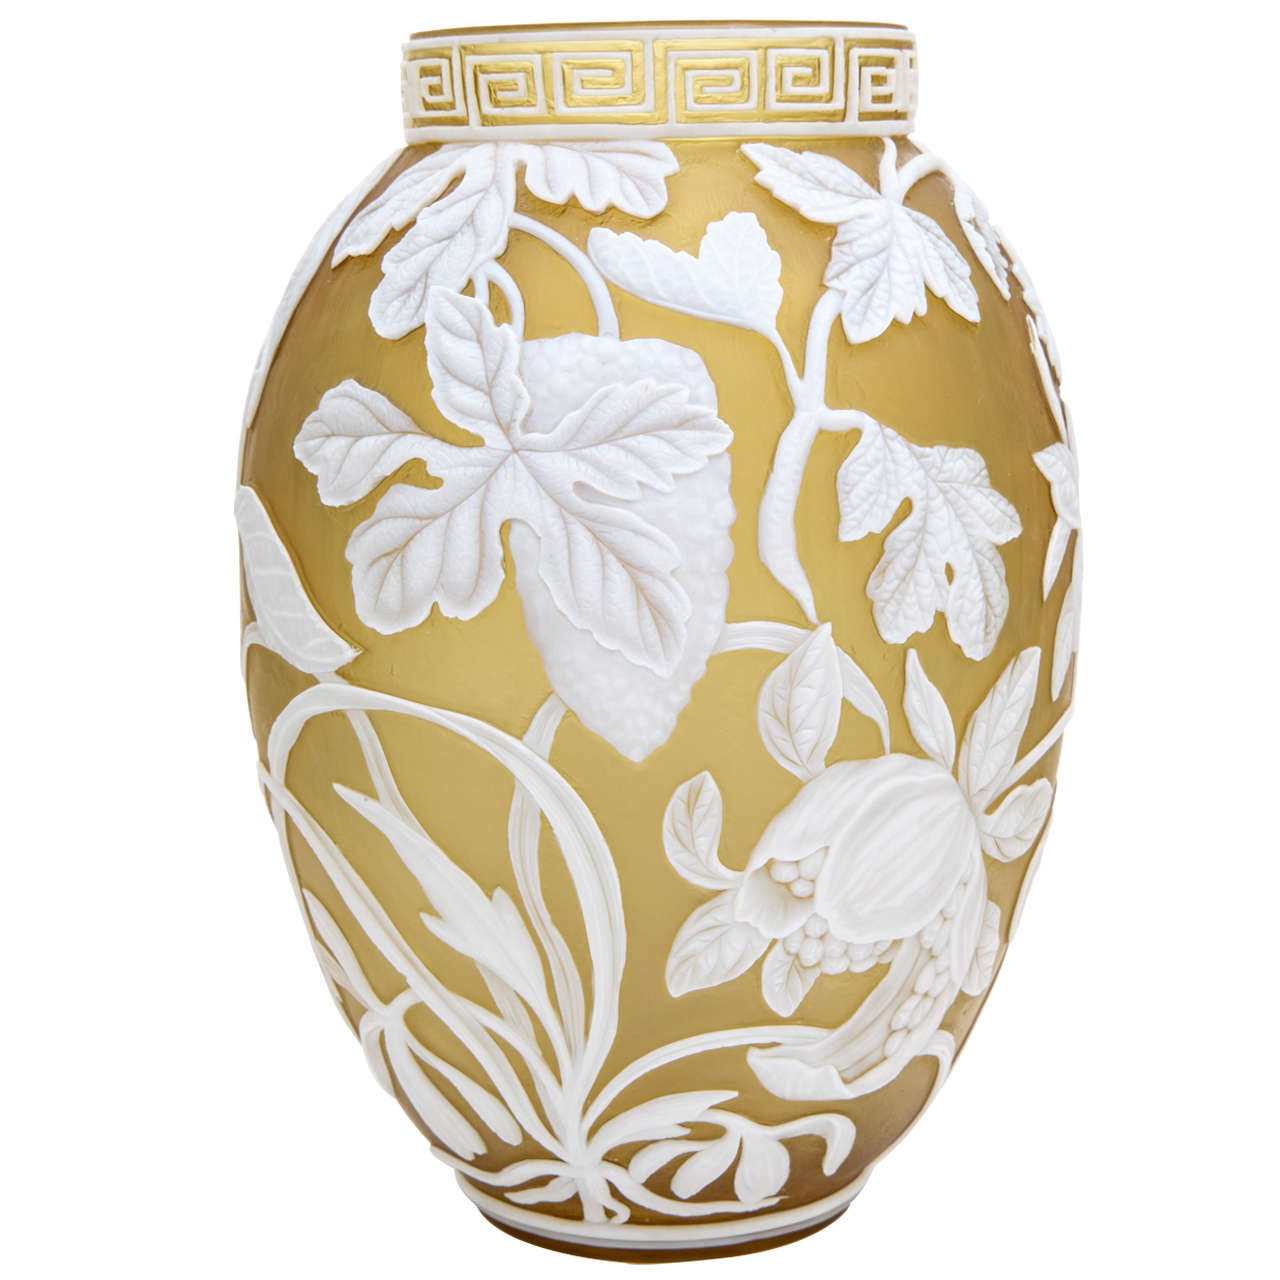 A Rare And Fine Signed Thomas Webb & Sons Cameo Vase For Sale